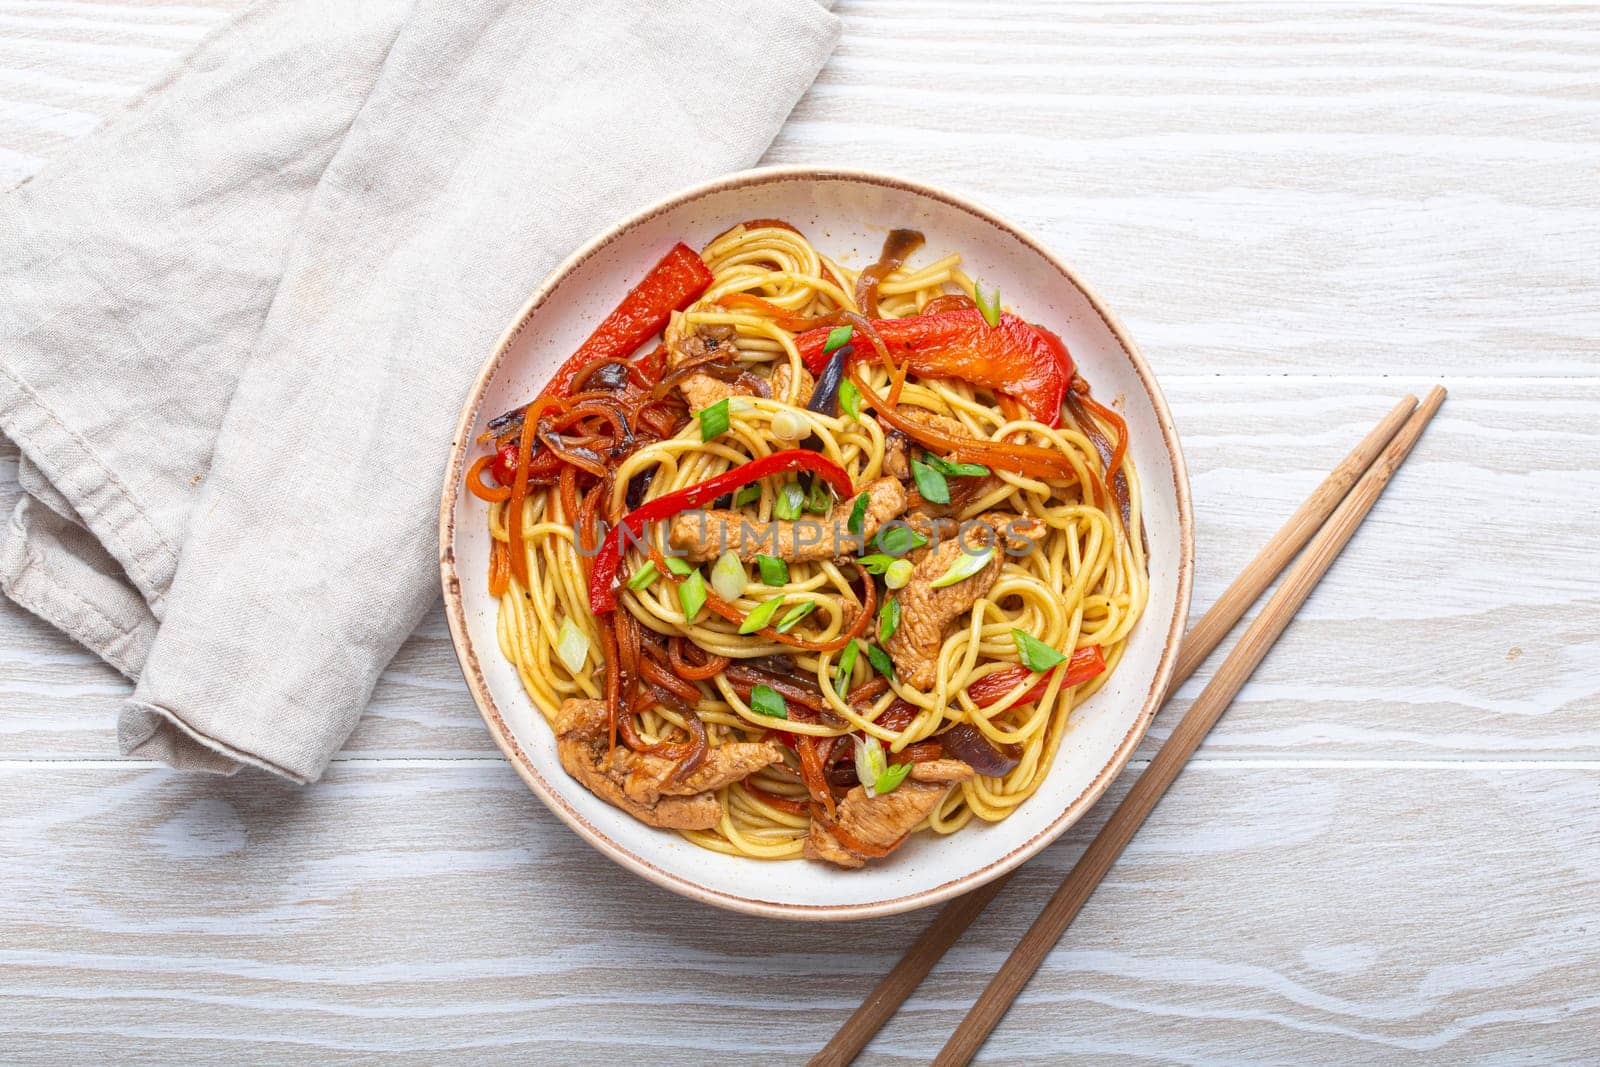 White bowl with Chow Mein or Lo Mein, traditional Chinese stir fry noodles with meat and vegetables, served with chopsticks top view on rustic white wooden background table.